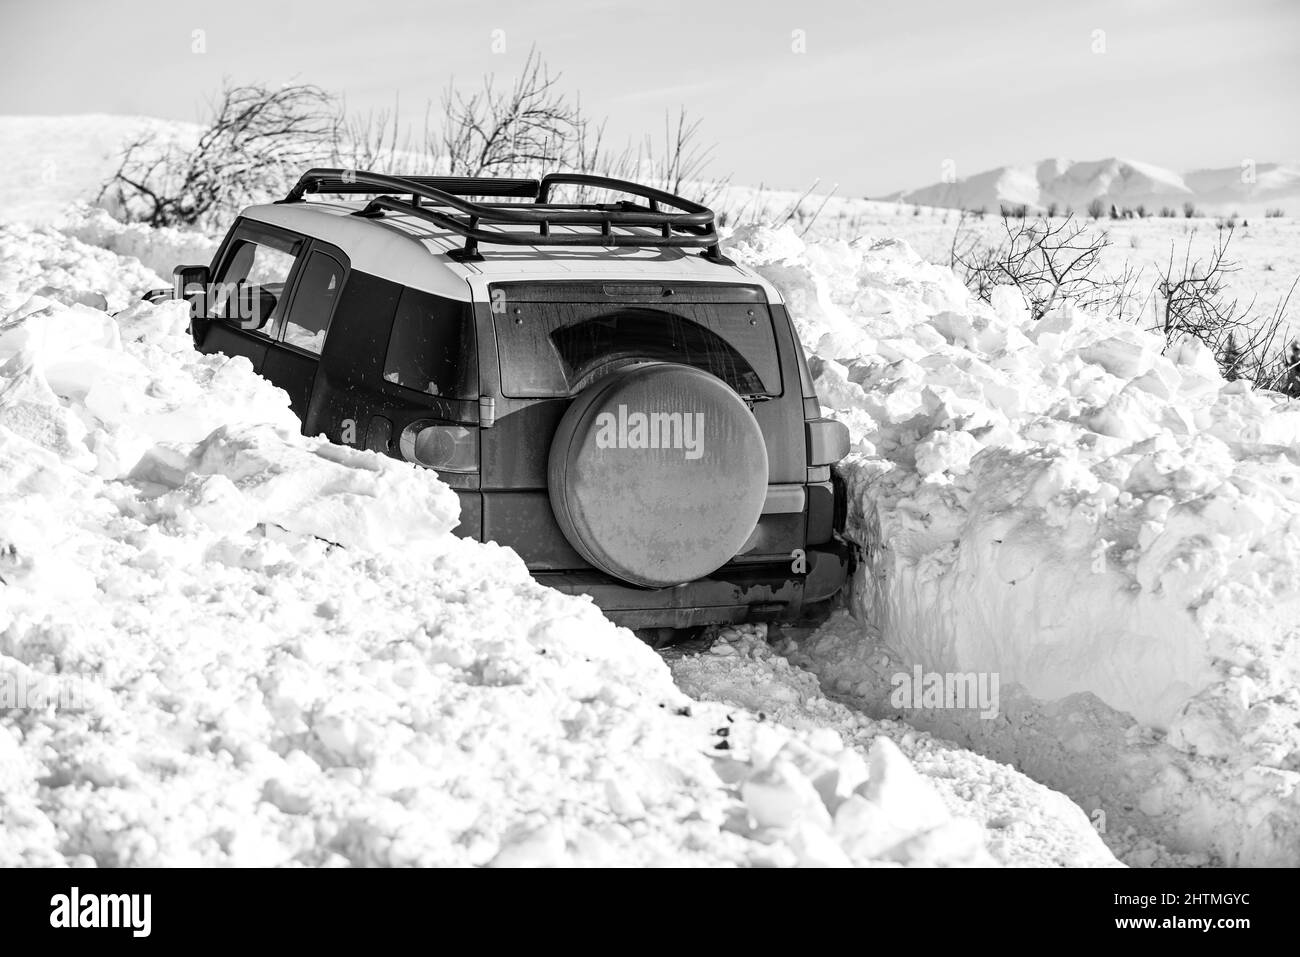 Winter offroad. Jeep in snow snowfall. Off road Adventure. Stock Photo